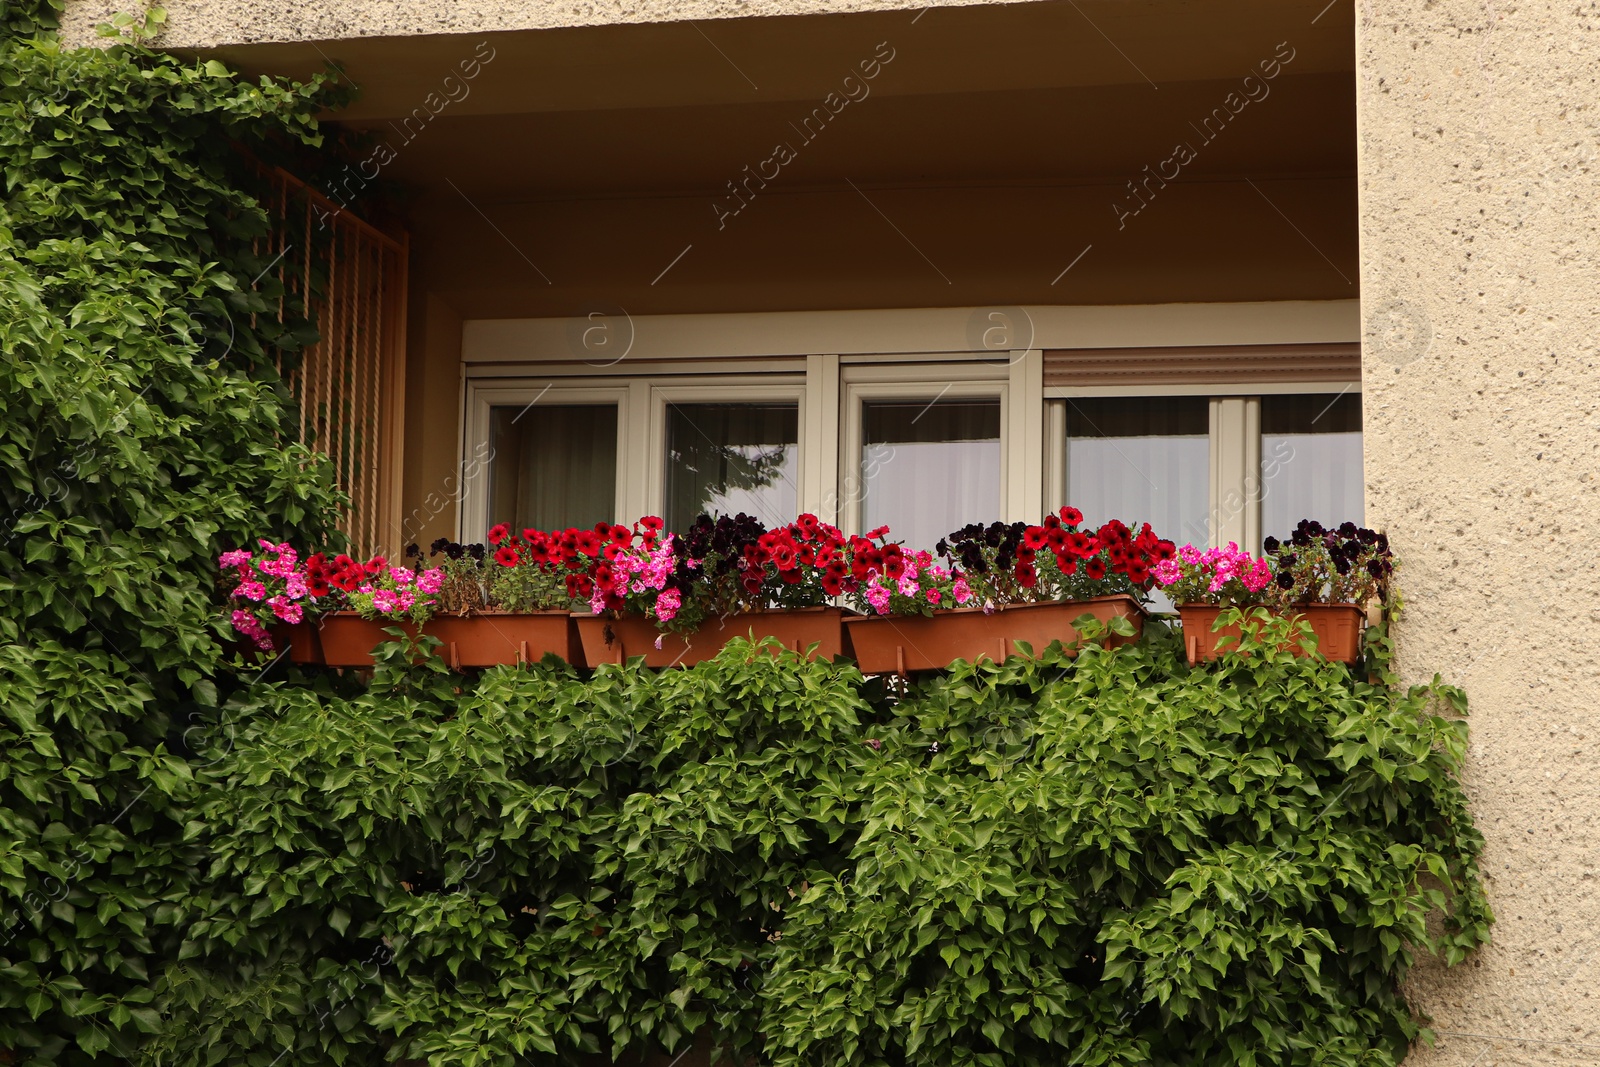 Photo of Balcony decorated with beautiful colorful flowers and green plant